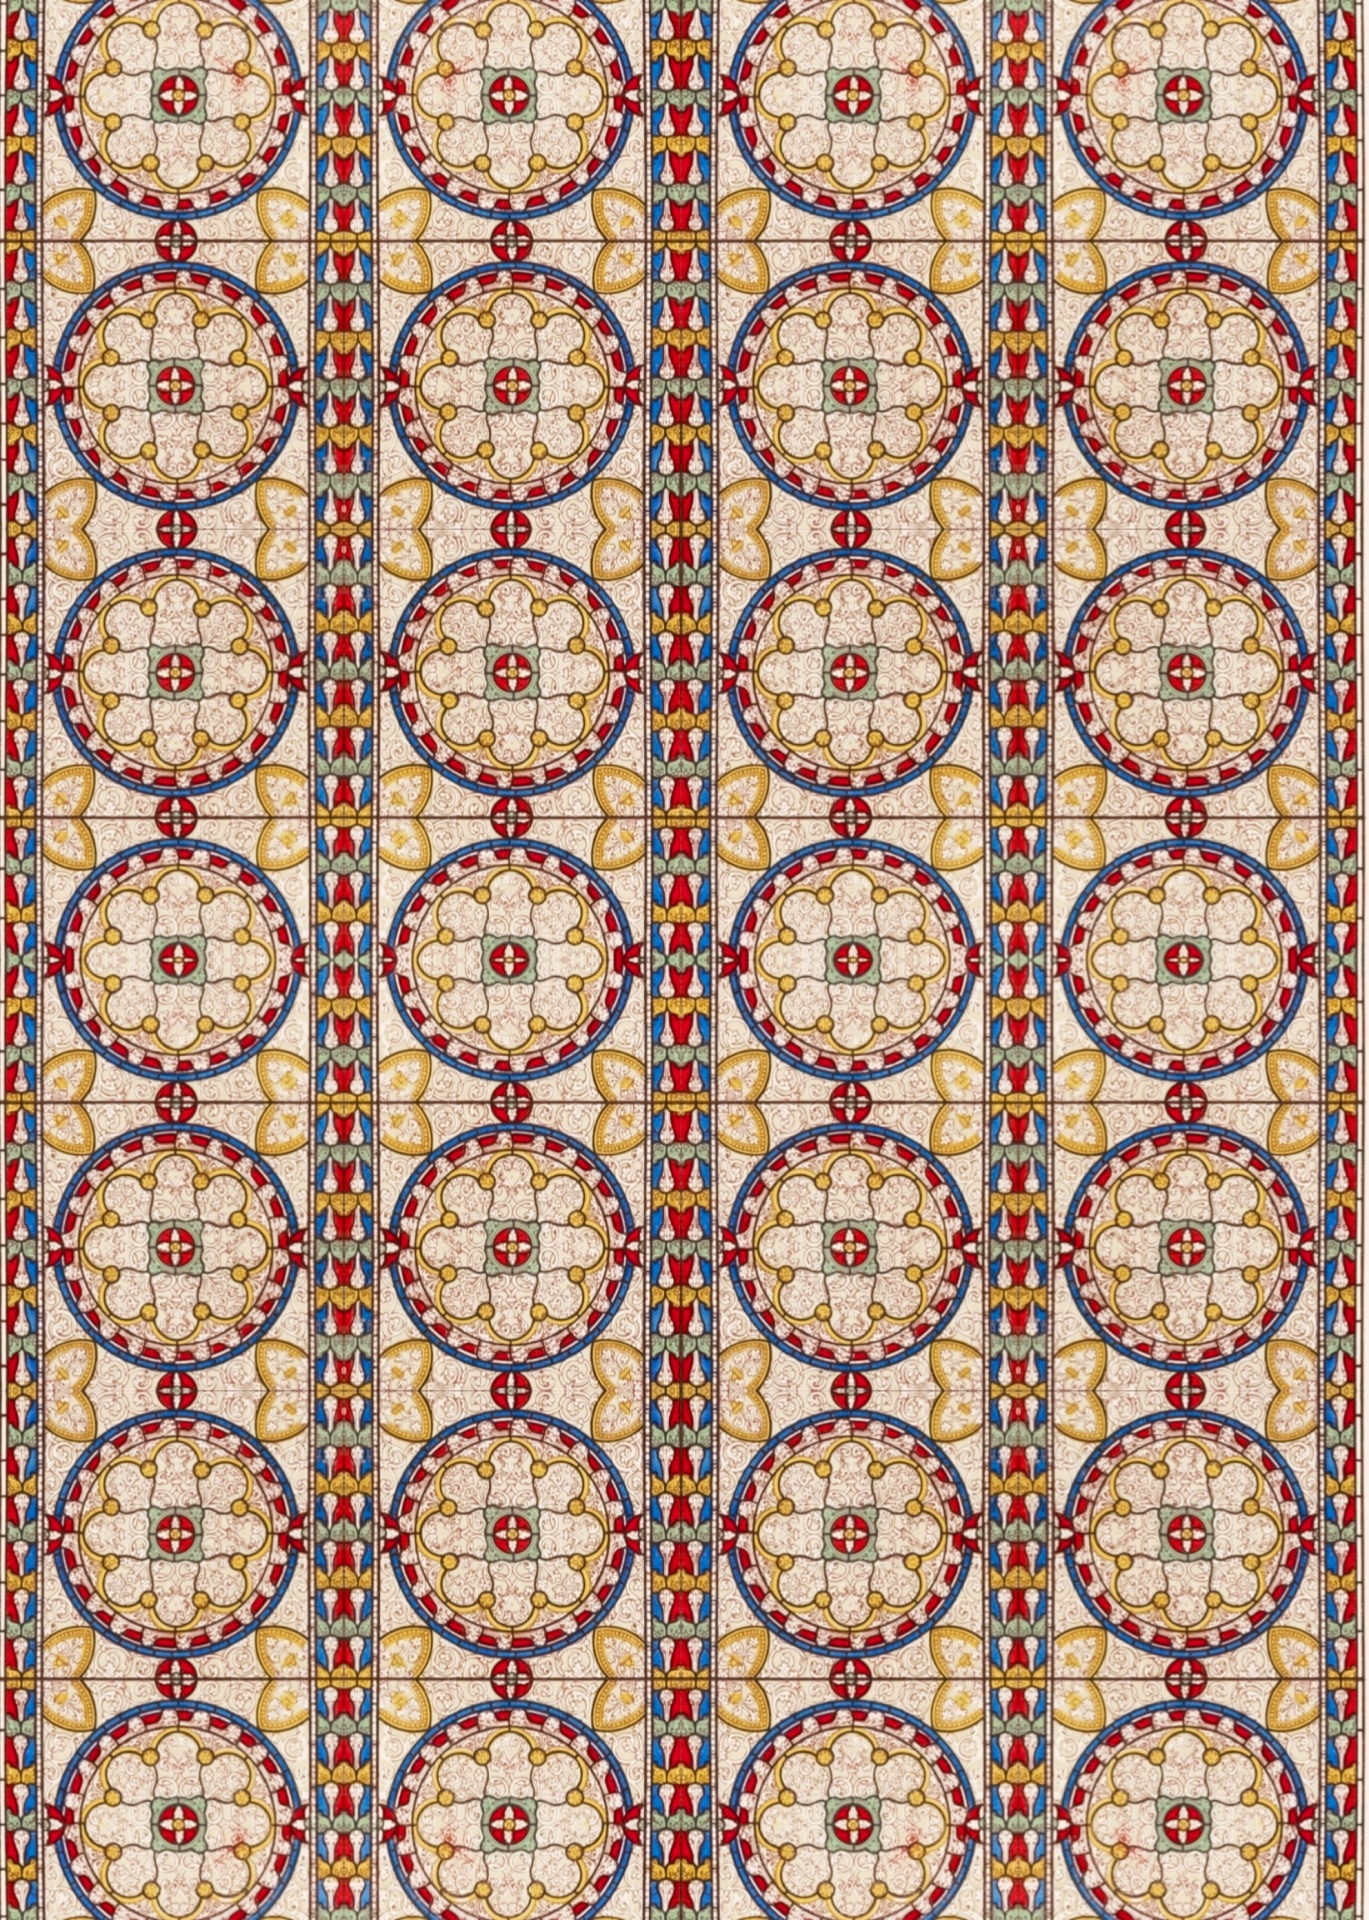 Vintage Pattern Stained Glass Background